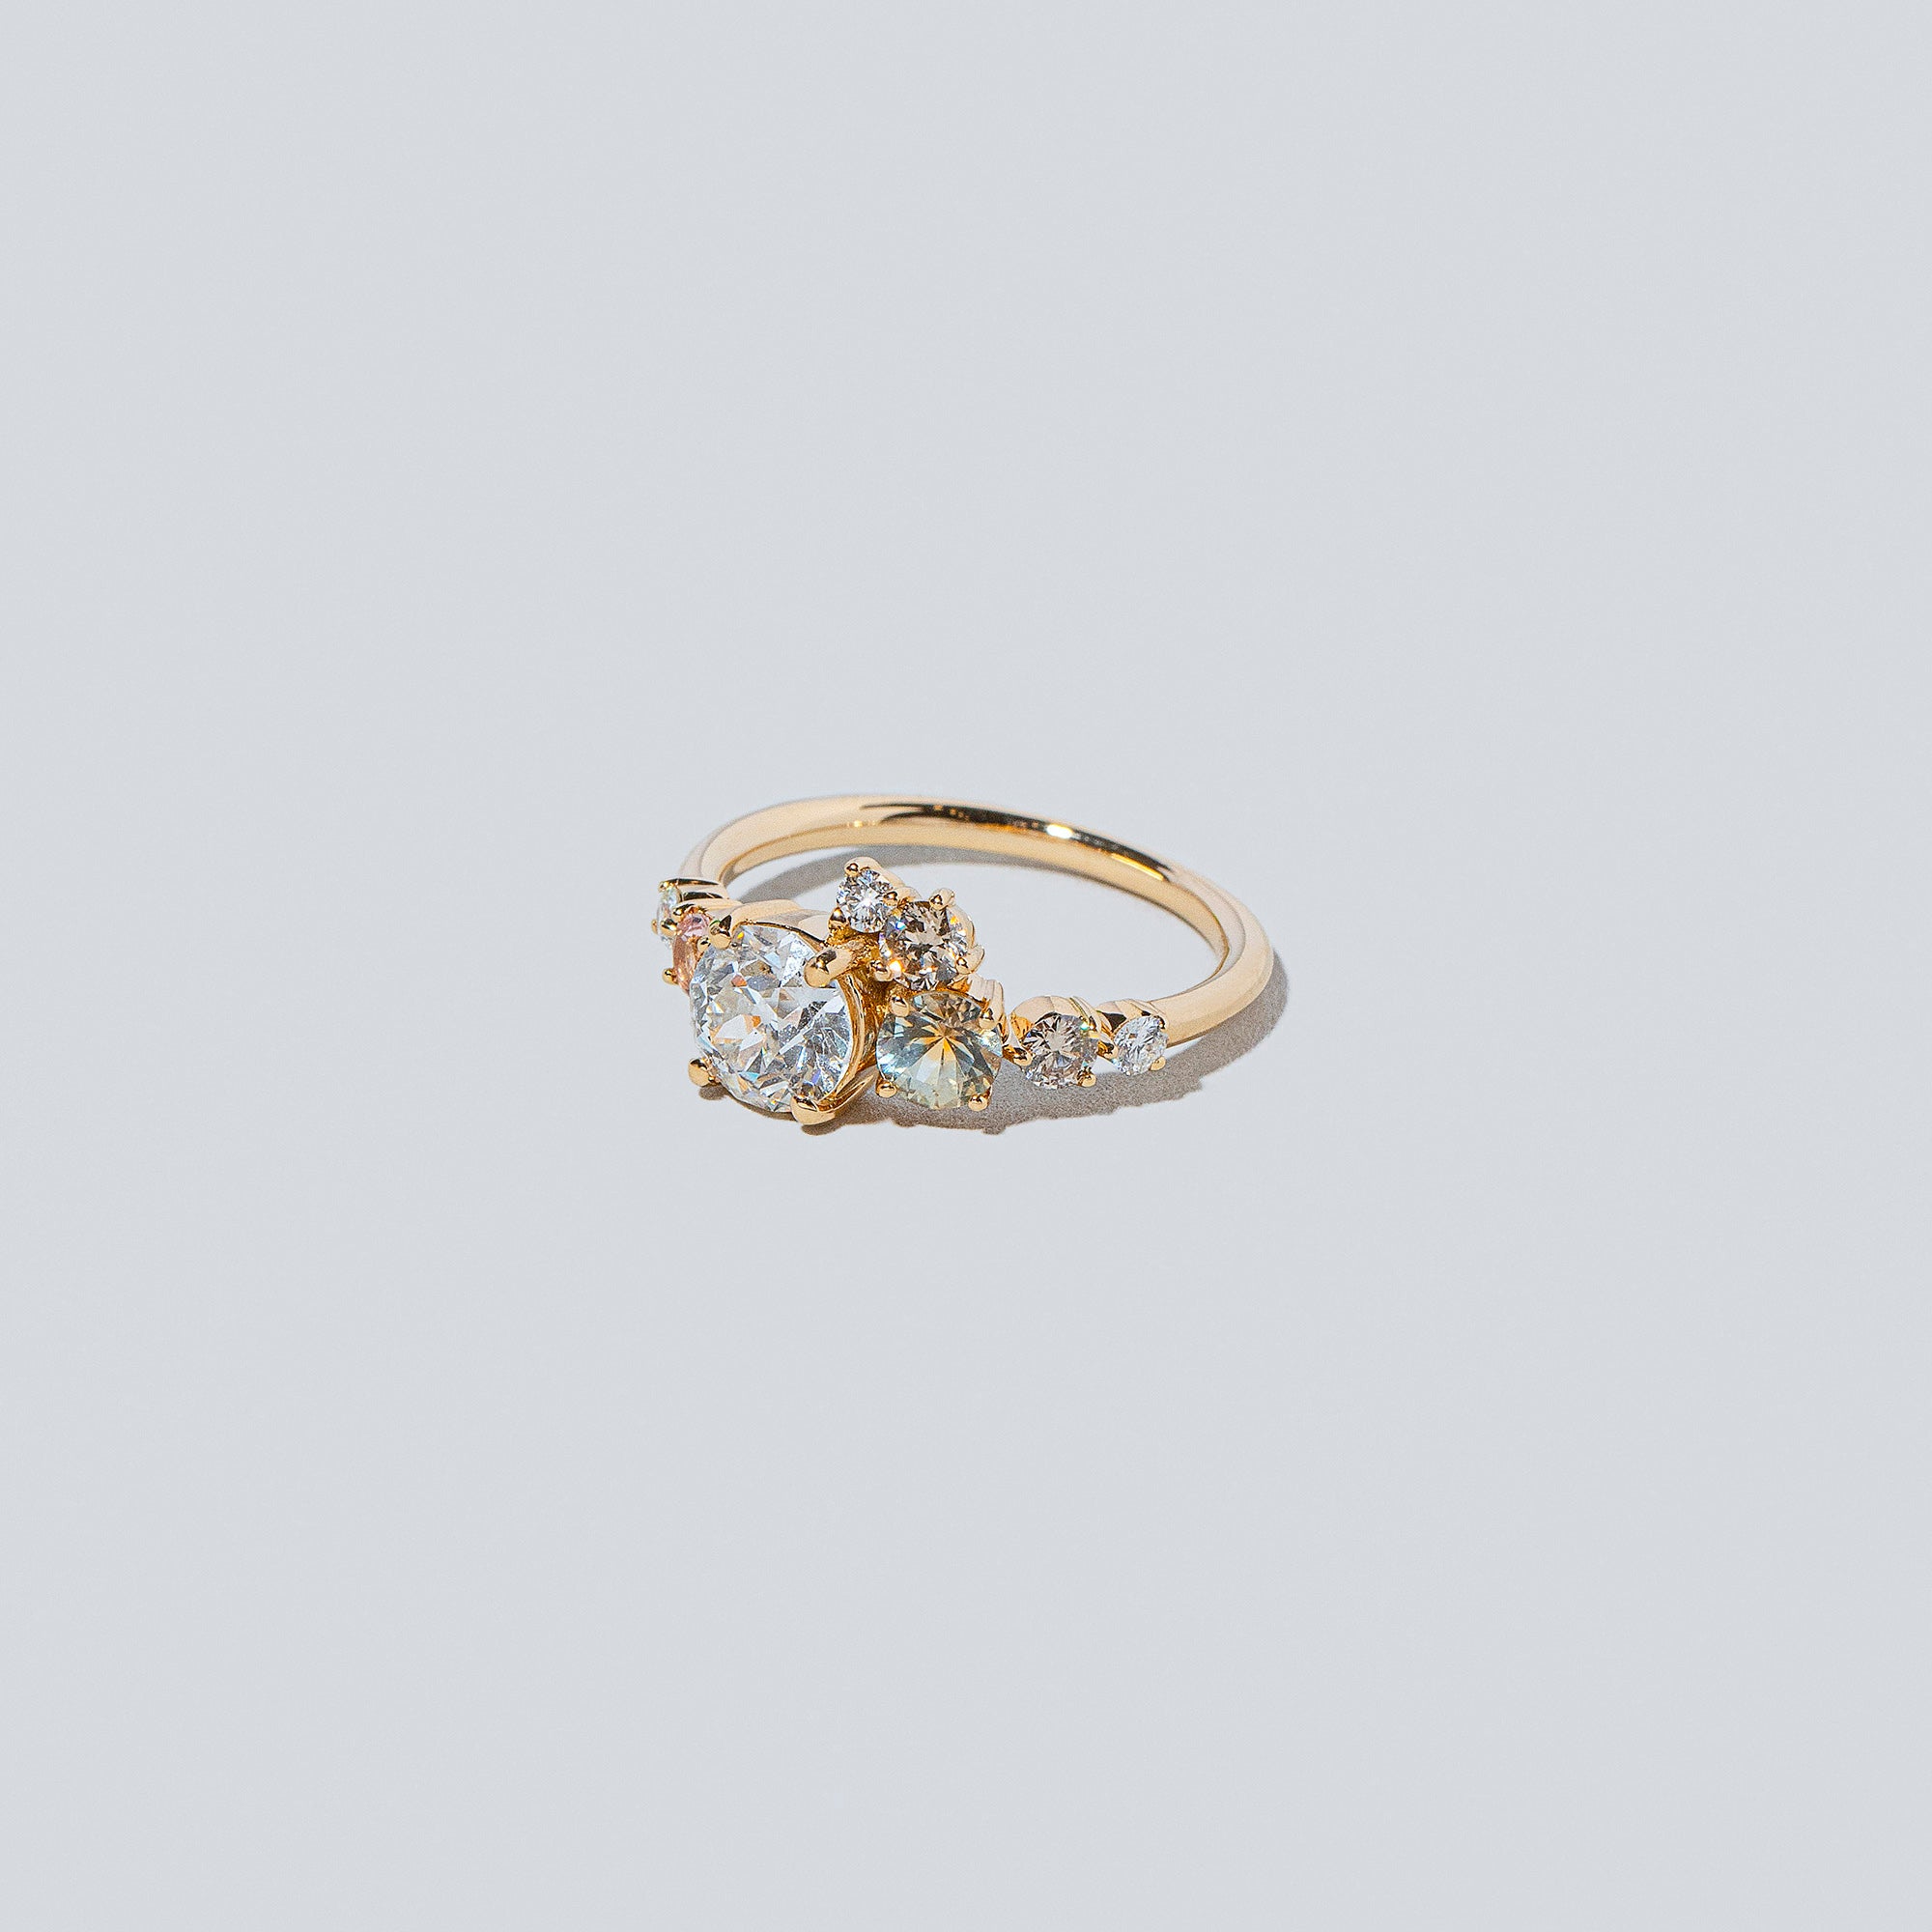 product_details::Peach Luna Ring on light colored background.